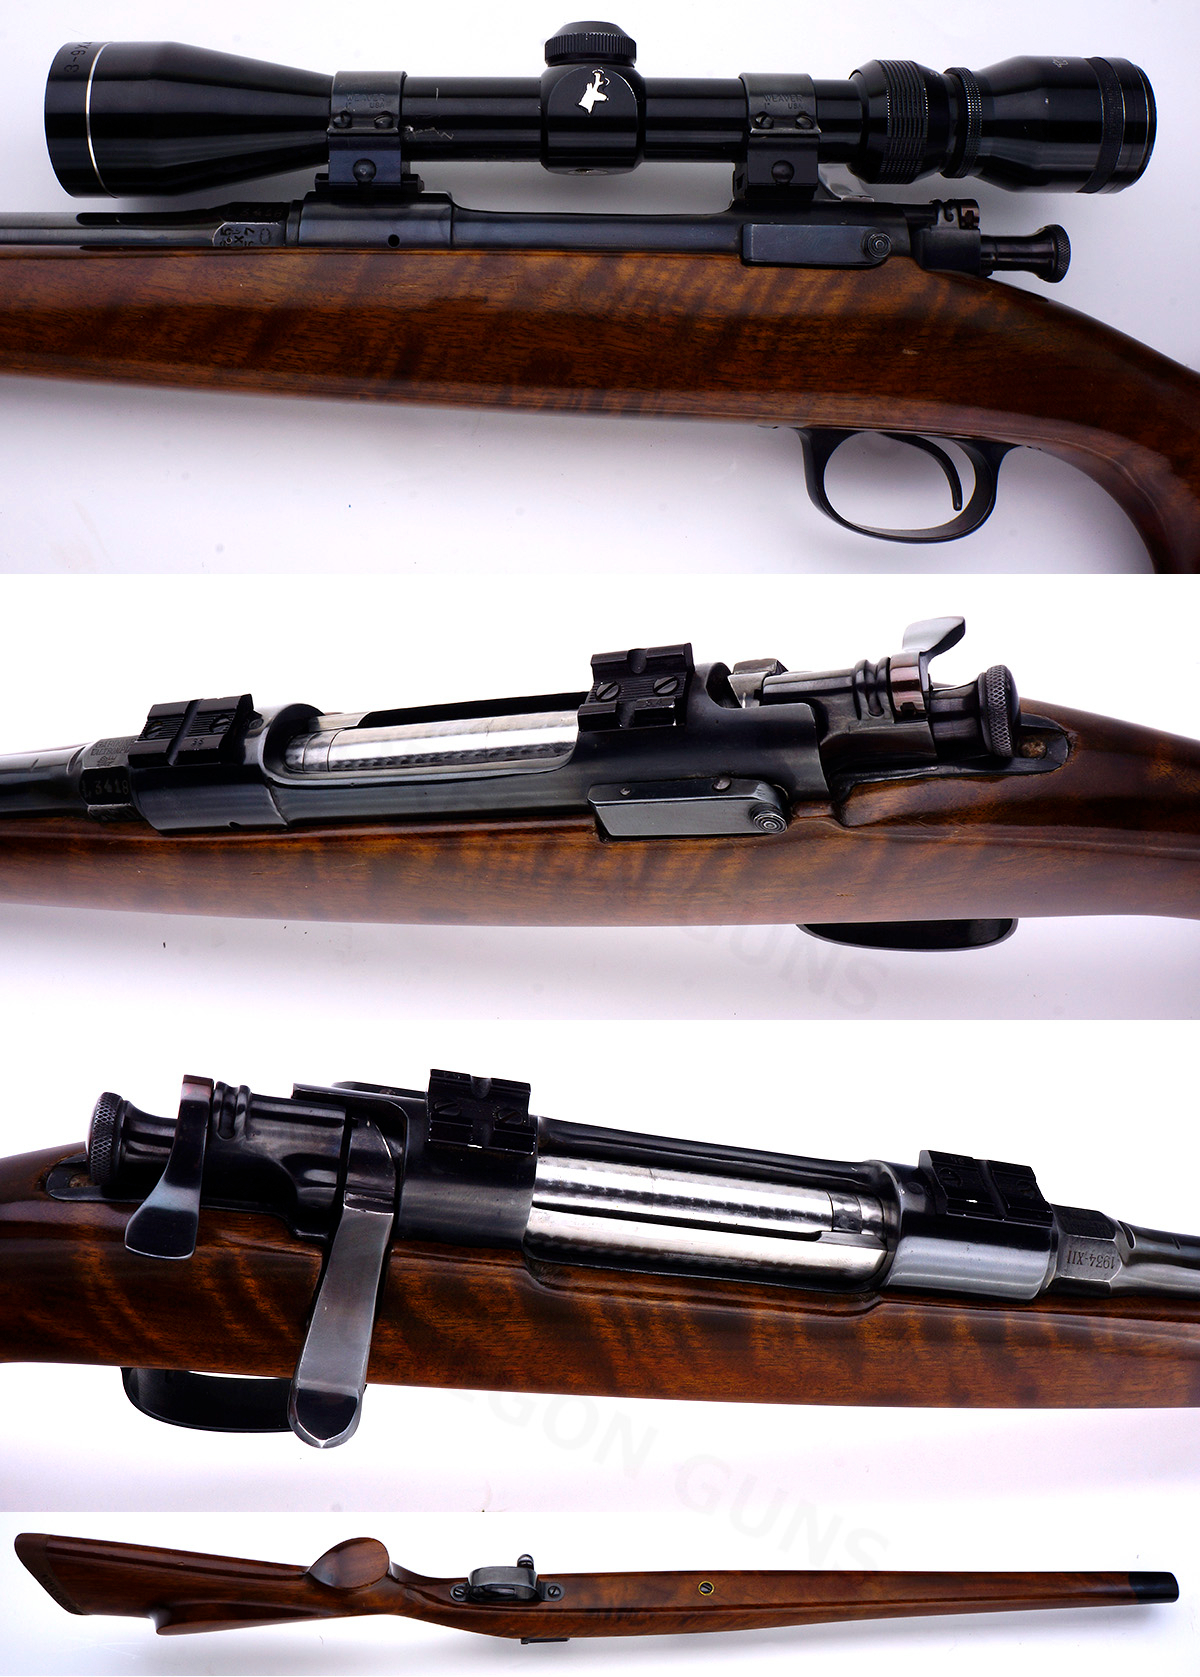 Carcano GARDONE VAL TROMPIA 91/28 BOLT RIFLE 1934-XII 6.5x57mm MAUSER C&R OK SN# L3418 6.5x57 Mauser - Picture 2